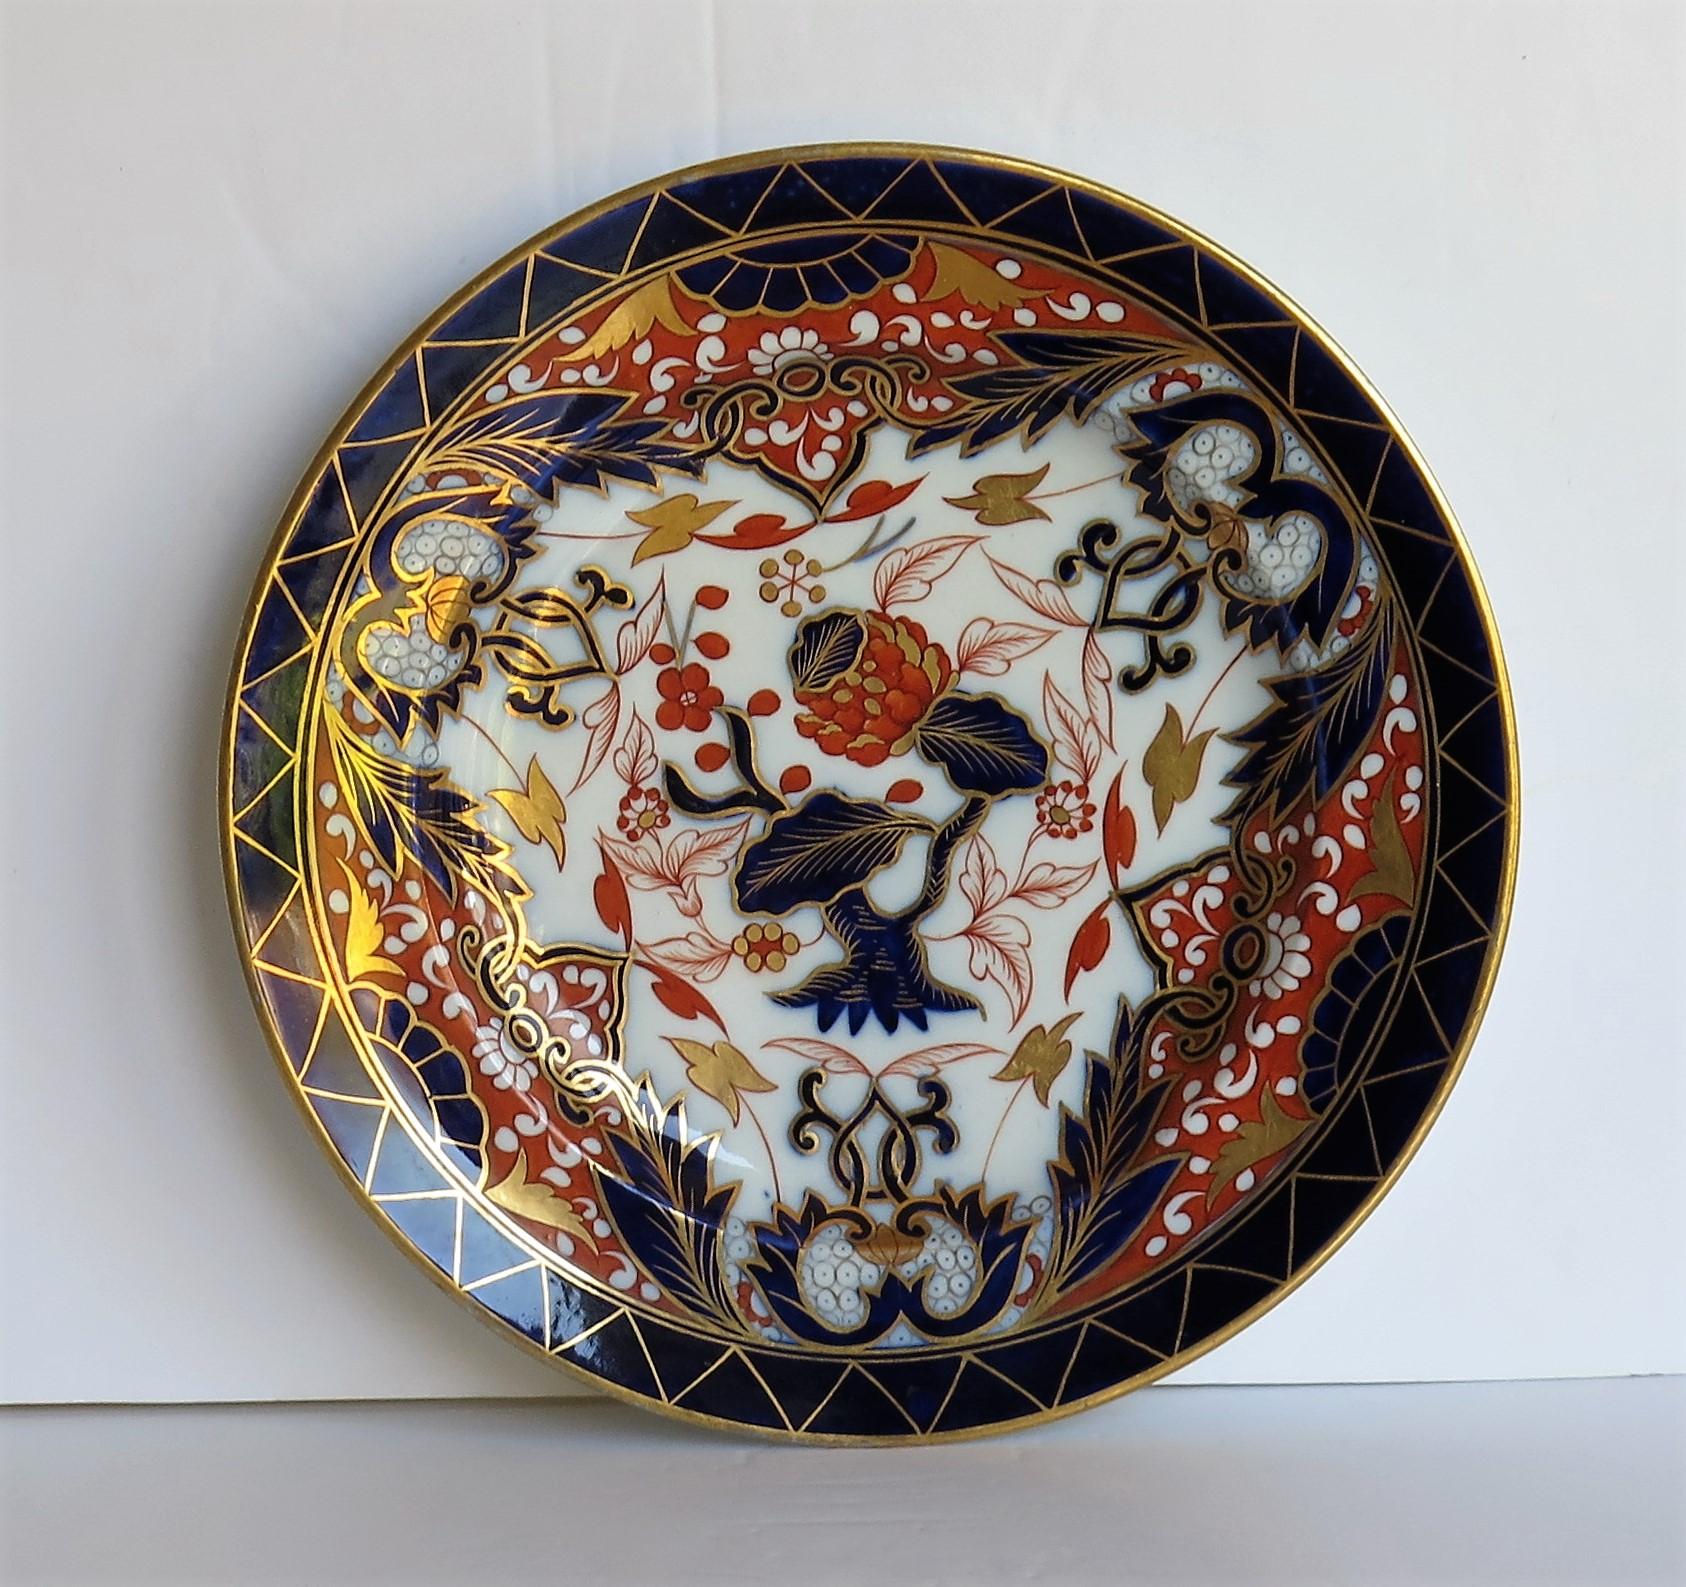 Chinoiserie Early Davenport Porcelain Plate in Imari King's Pattern 330, English, circa 1820